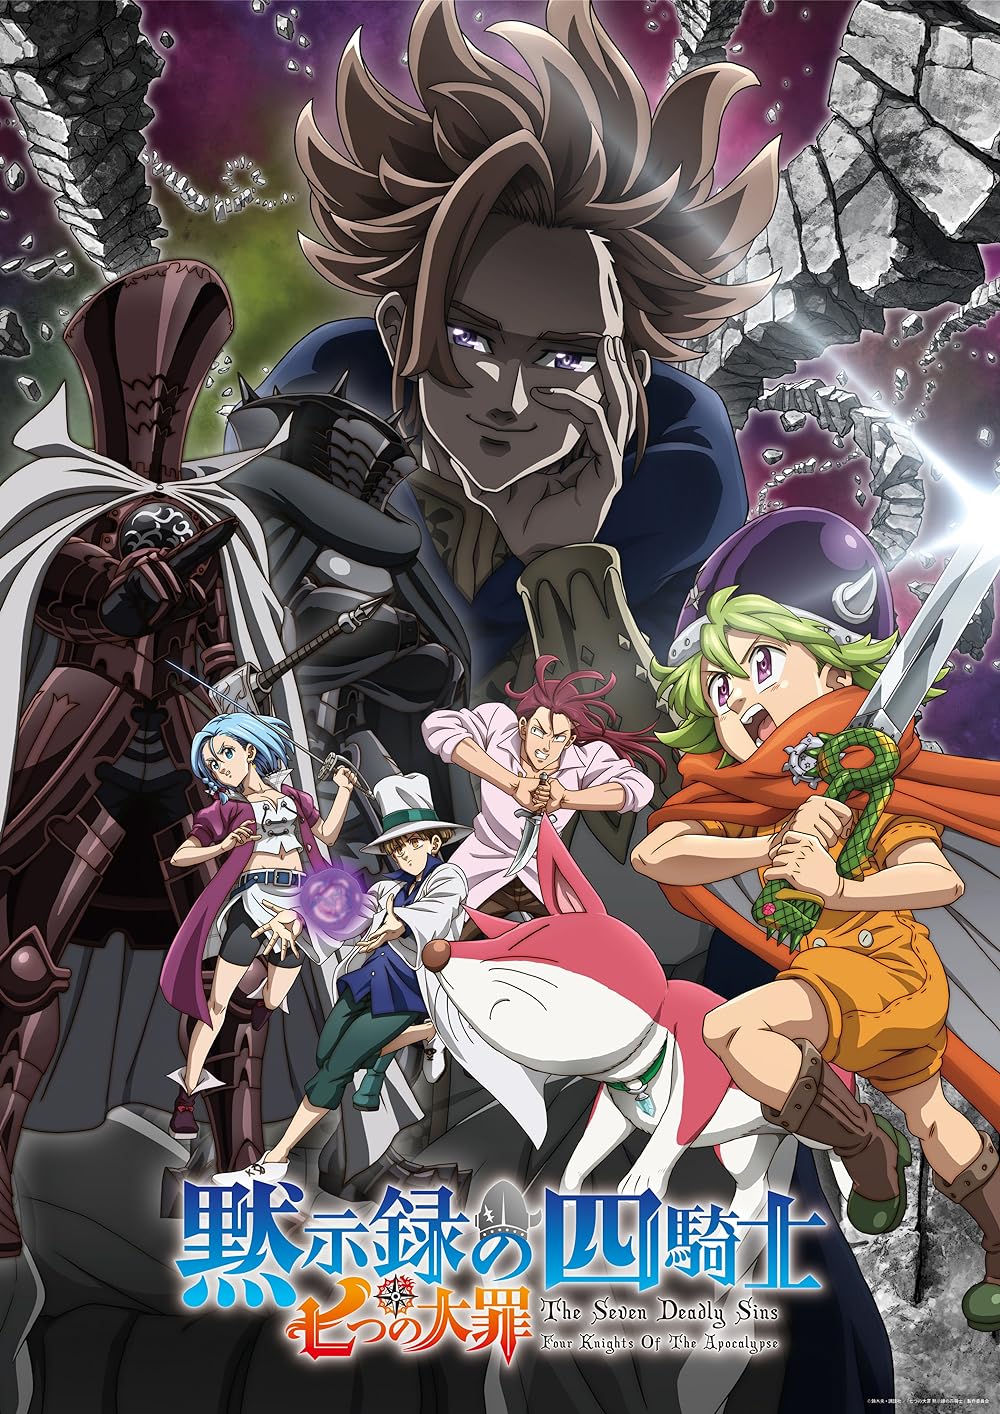 The Seven Deadly Sins: Four Knights of the Apocalypse (January 31) - Streaming on NetflixThe Seven Deadly Sins: Four Knights of the Apocalypse is a sequel series that takes place years after the Seven Deadly Sins, Britannia’s infamous Holy Knights, disband. The plot then shifts to Percival, a young boy fated to be one of the prophesied Four Knights of the Apocalypse, foretold to bring destruction to the world. His journey begins in the aftermath of a tragic incident involving his grandfather and father, leading him to seek the other three members in hopes of finding answers about his destiny.